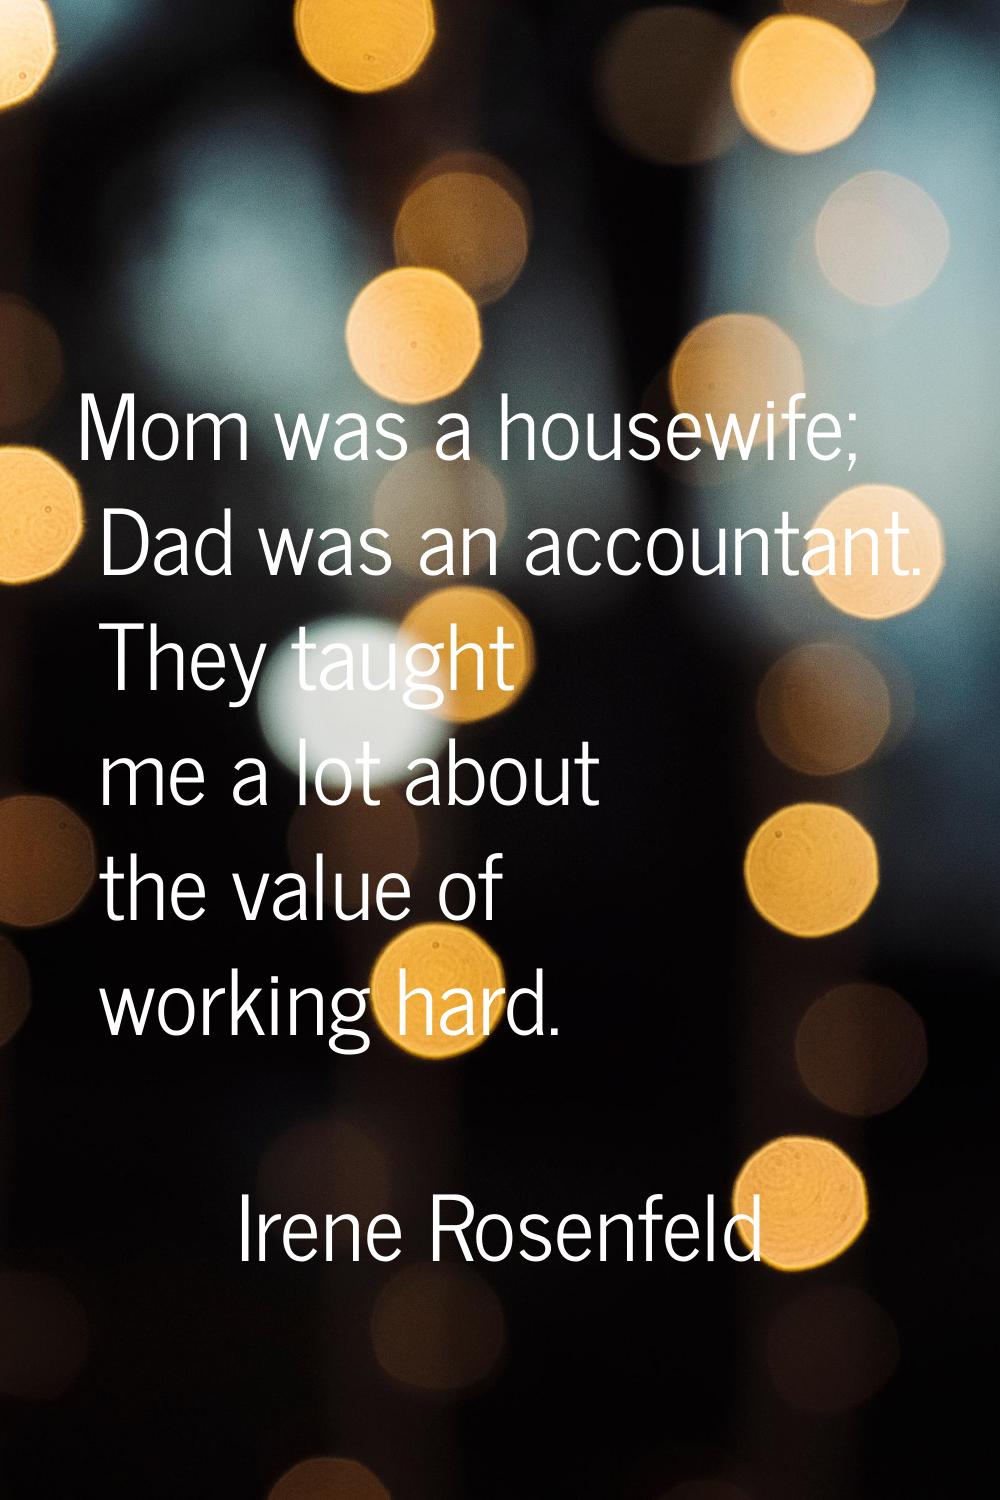 Mom was a housewife; Dad was an accountant. They taught me a lot about the value of working hard.